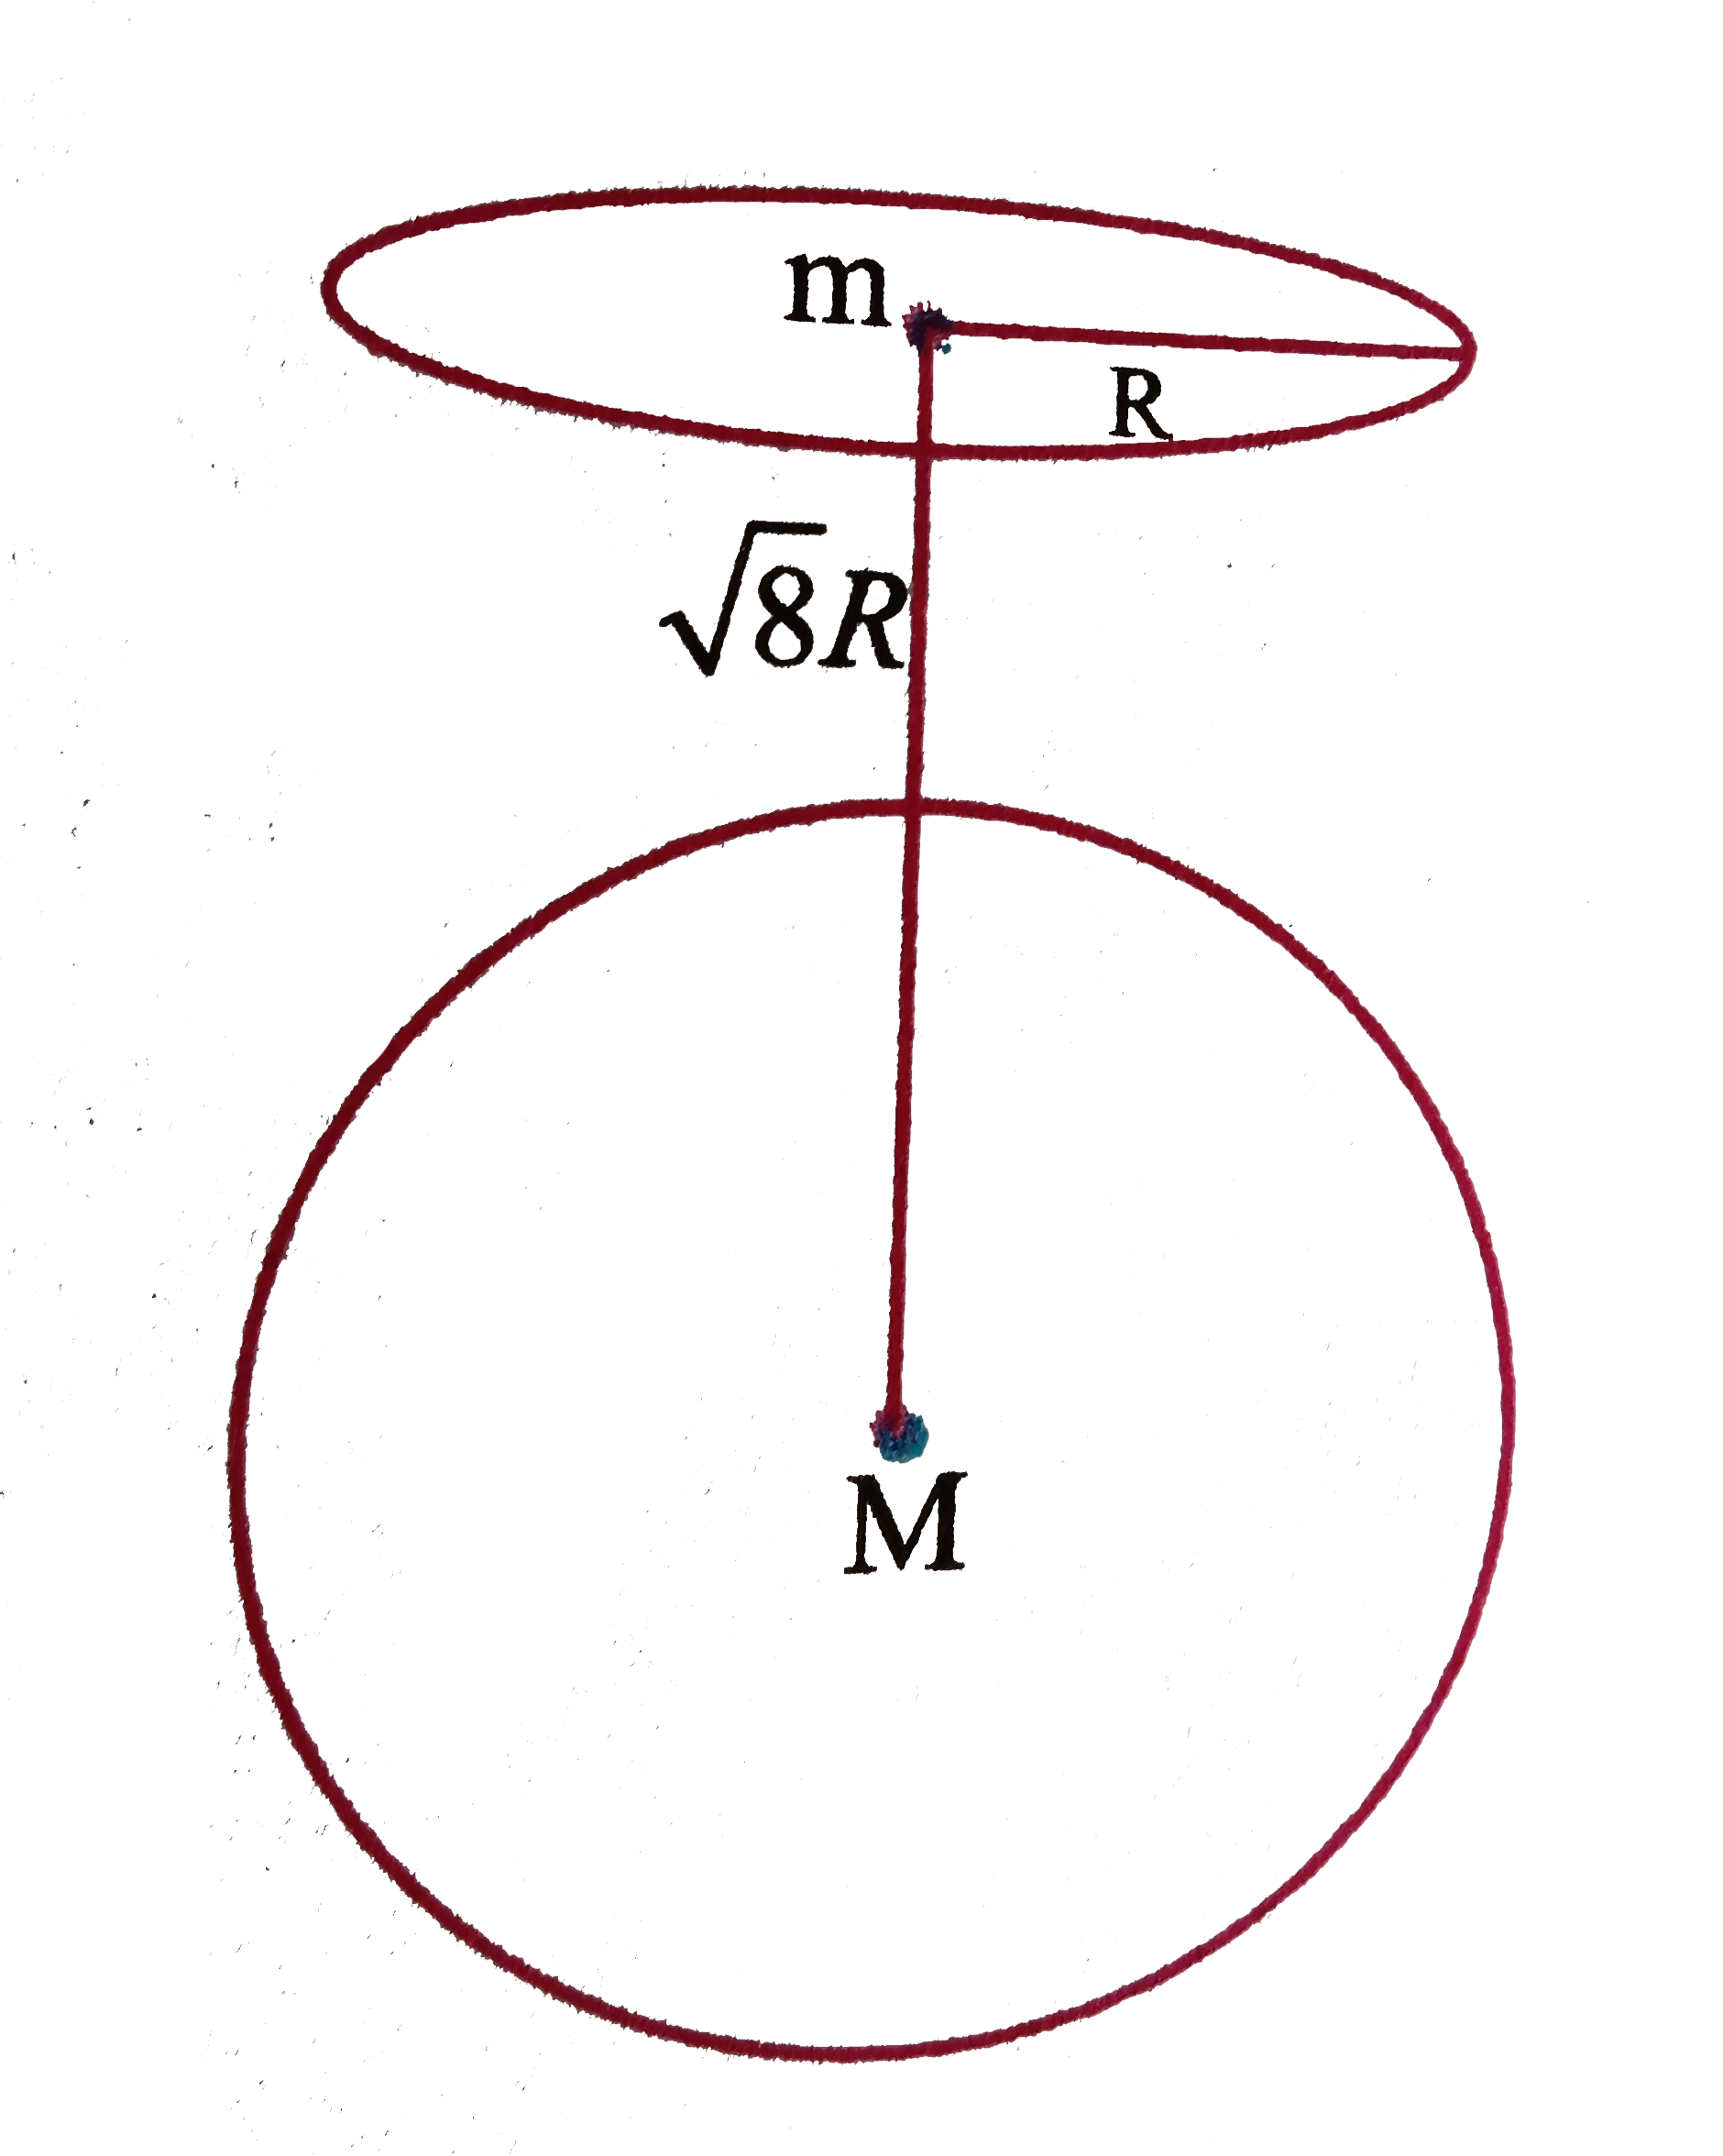 The centres of a ring of mass m and a sphere of mass M of equal radius R, are at a distance sqrt(8) R apart as shown. The force of attraction between the ring and the sphere is